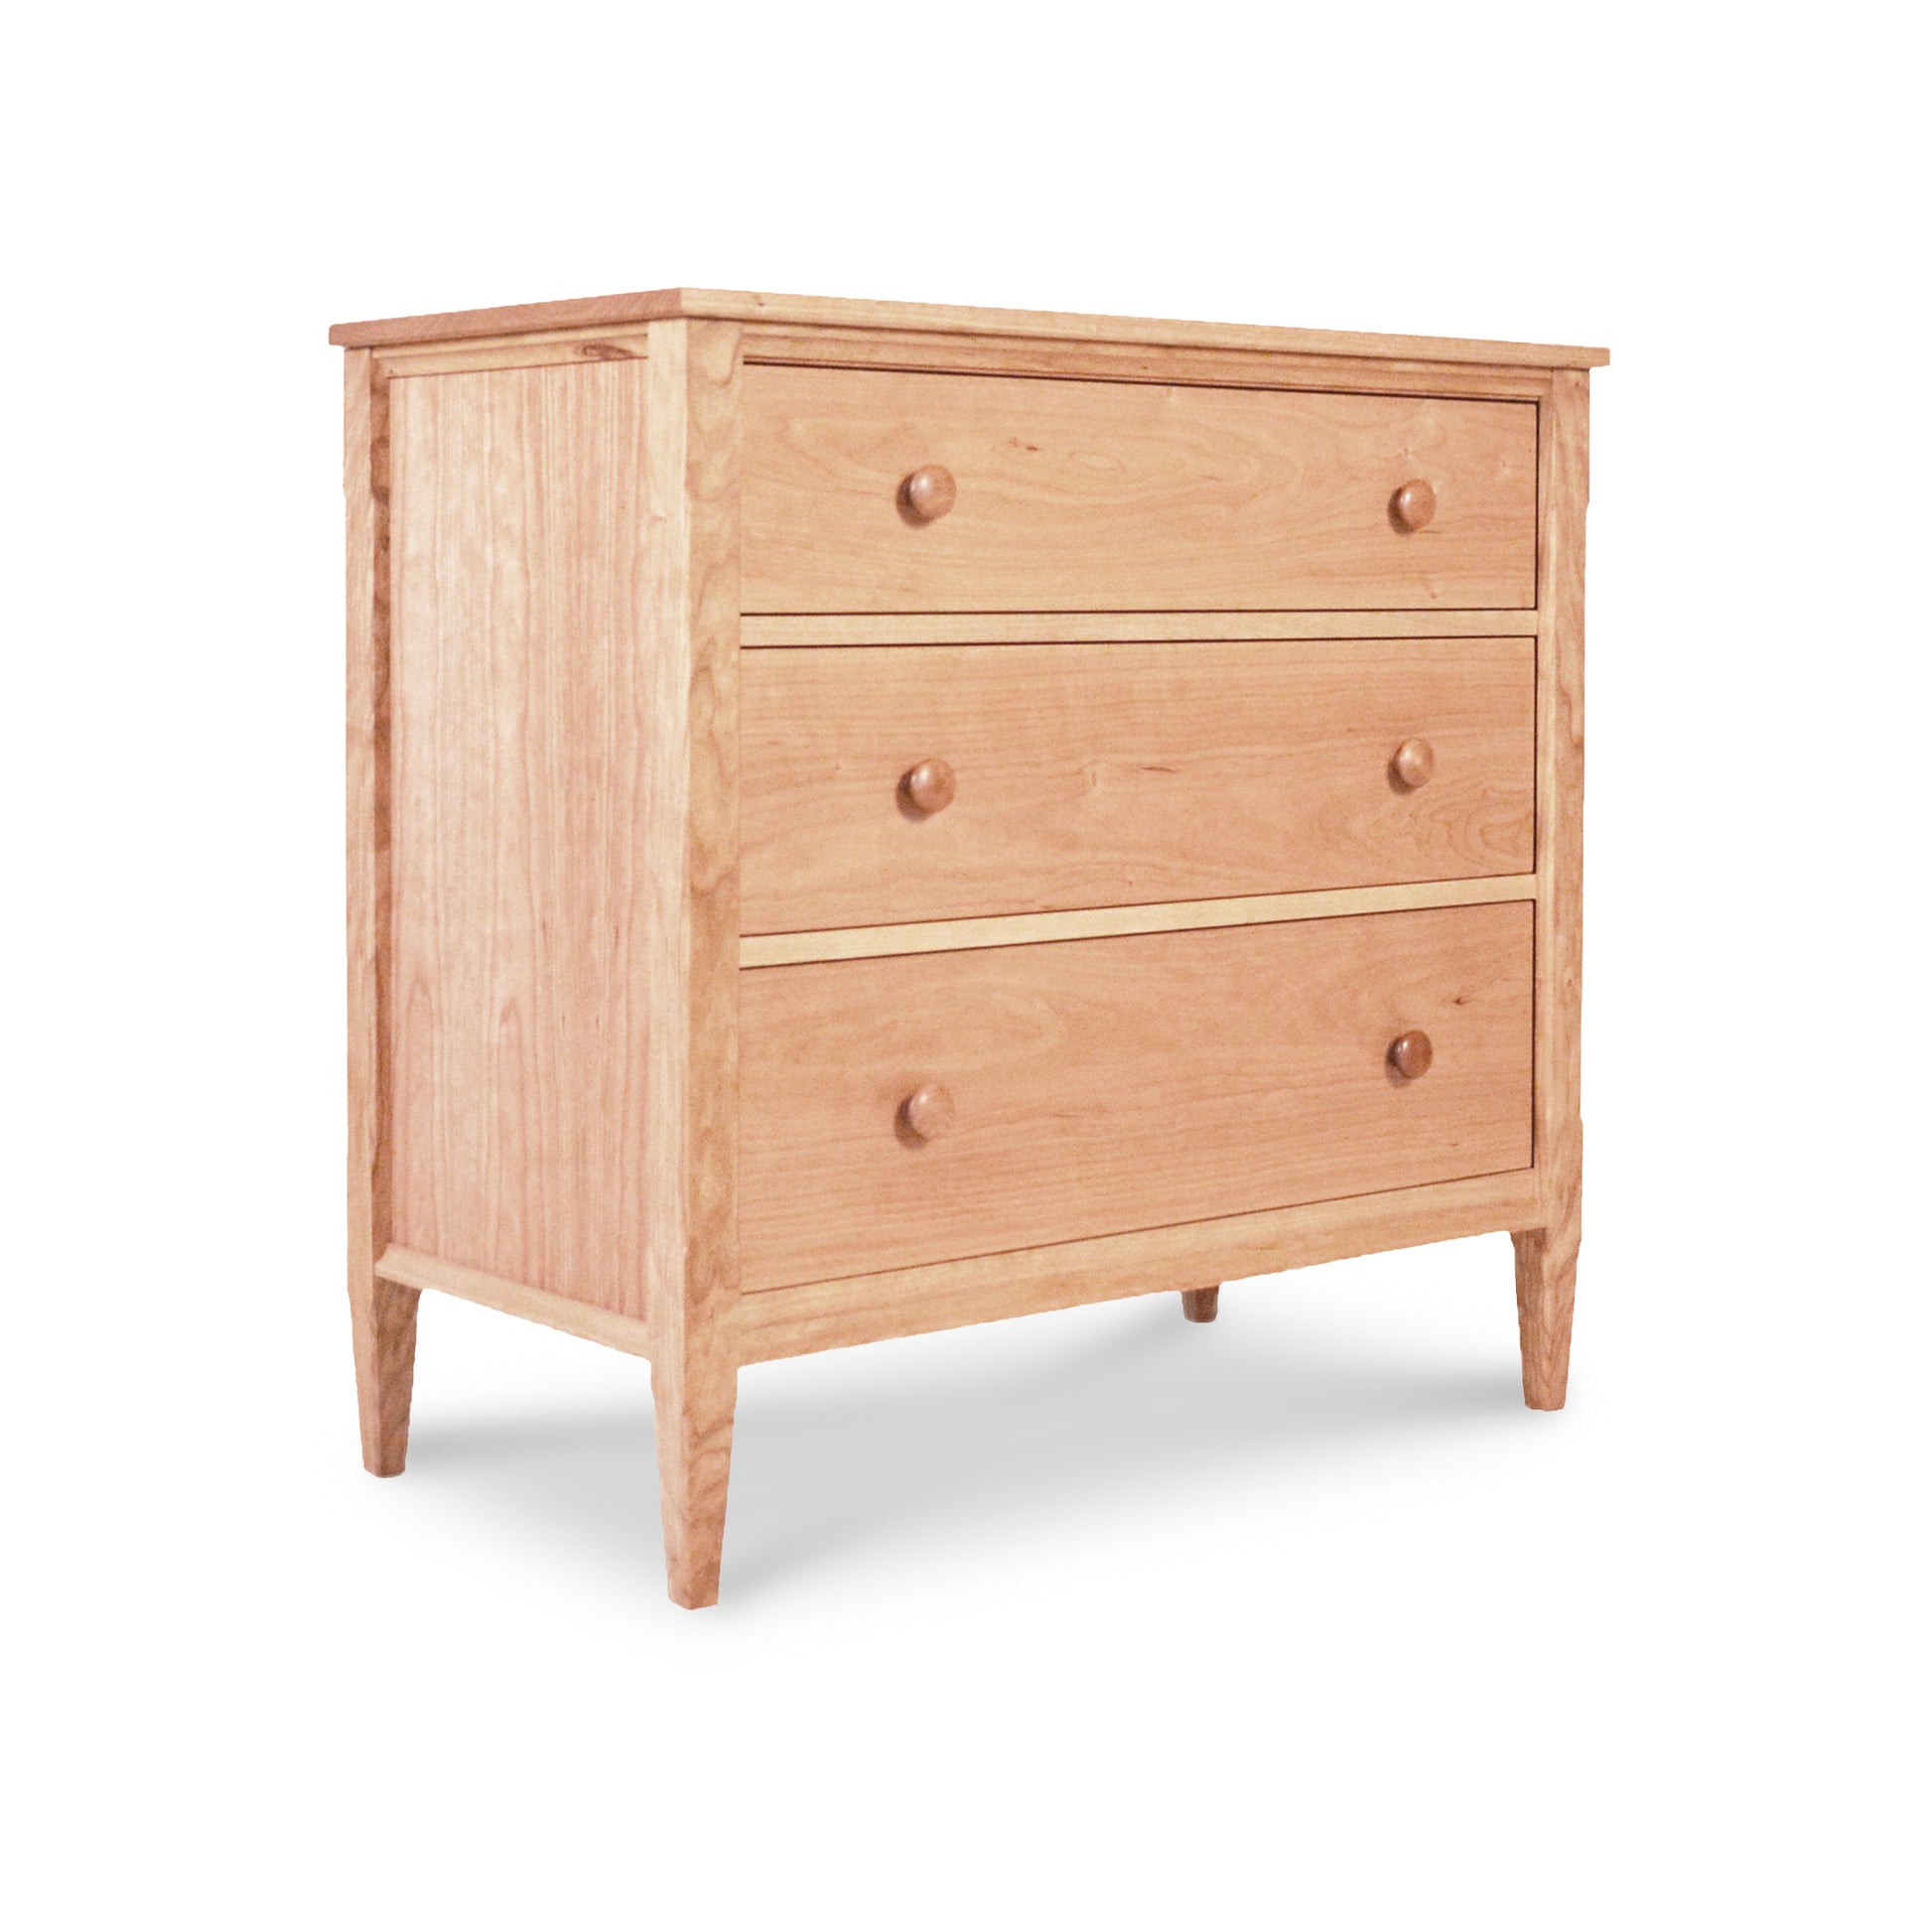 A Vermont Shaker 3-Drawer Chest from Maple Corner Woodworks, with a simple, traditional design, featuring round knobs and standing on short, slightly tapered legs. The background is plain white, highlighting the solid wood finish.